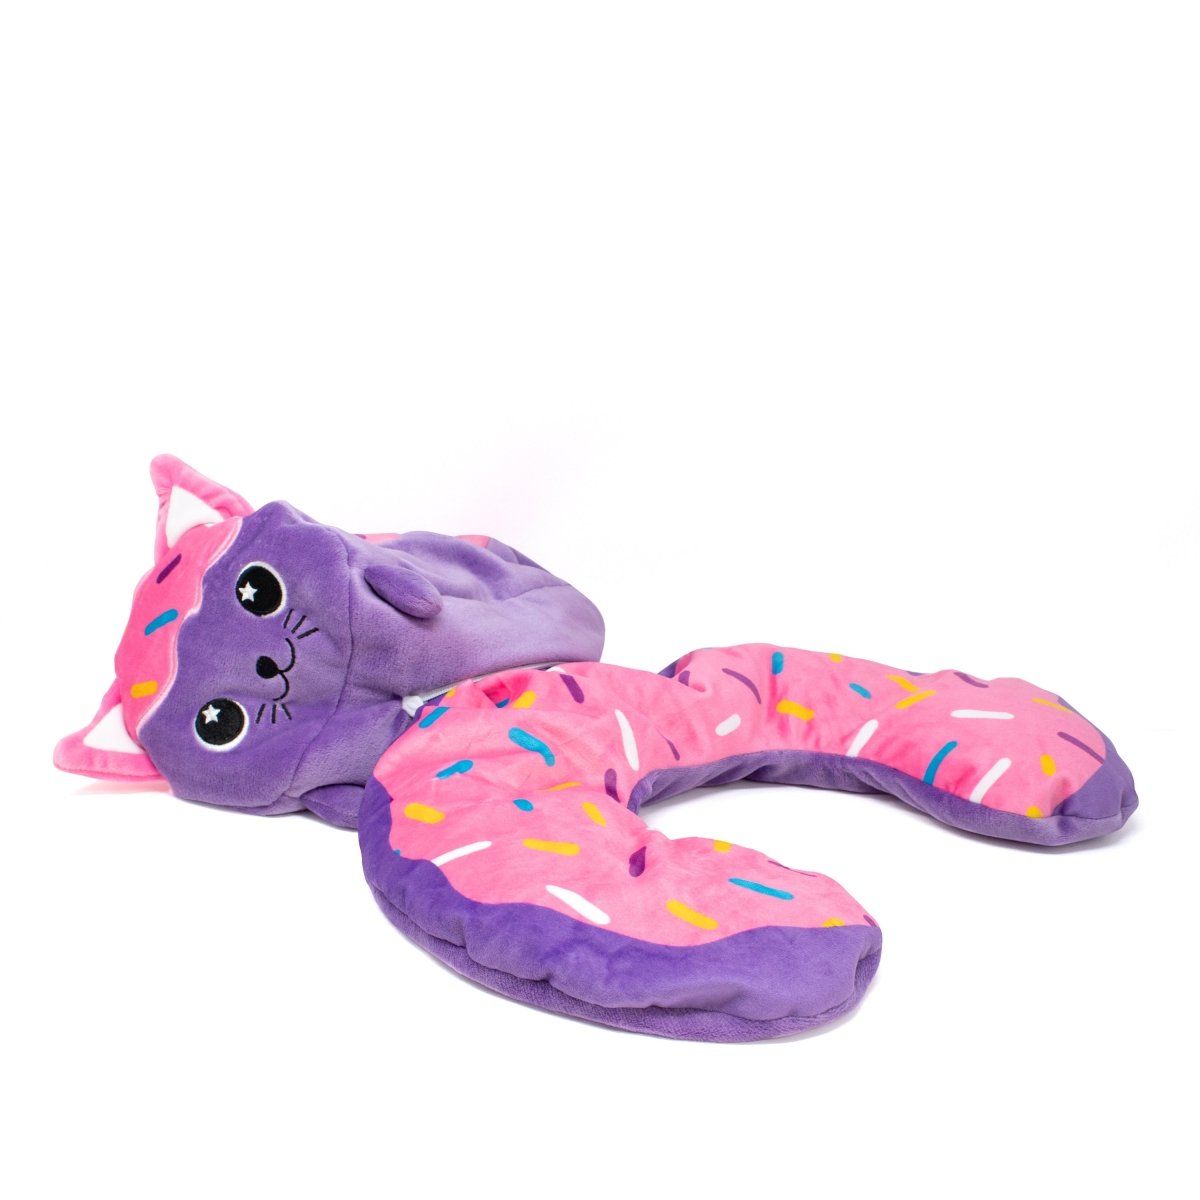 Freckles the Doughnut Cat 2-In-1 Travel Pillow